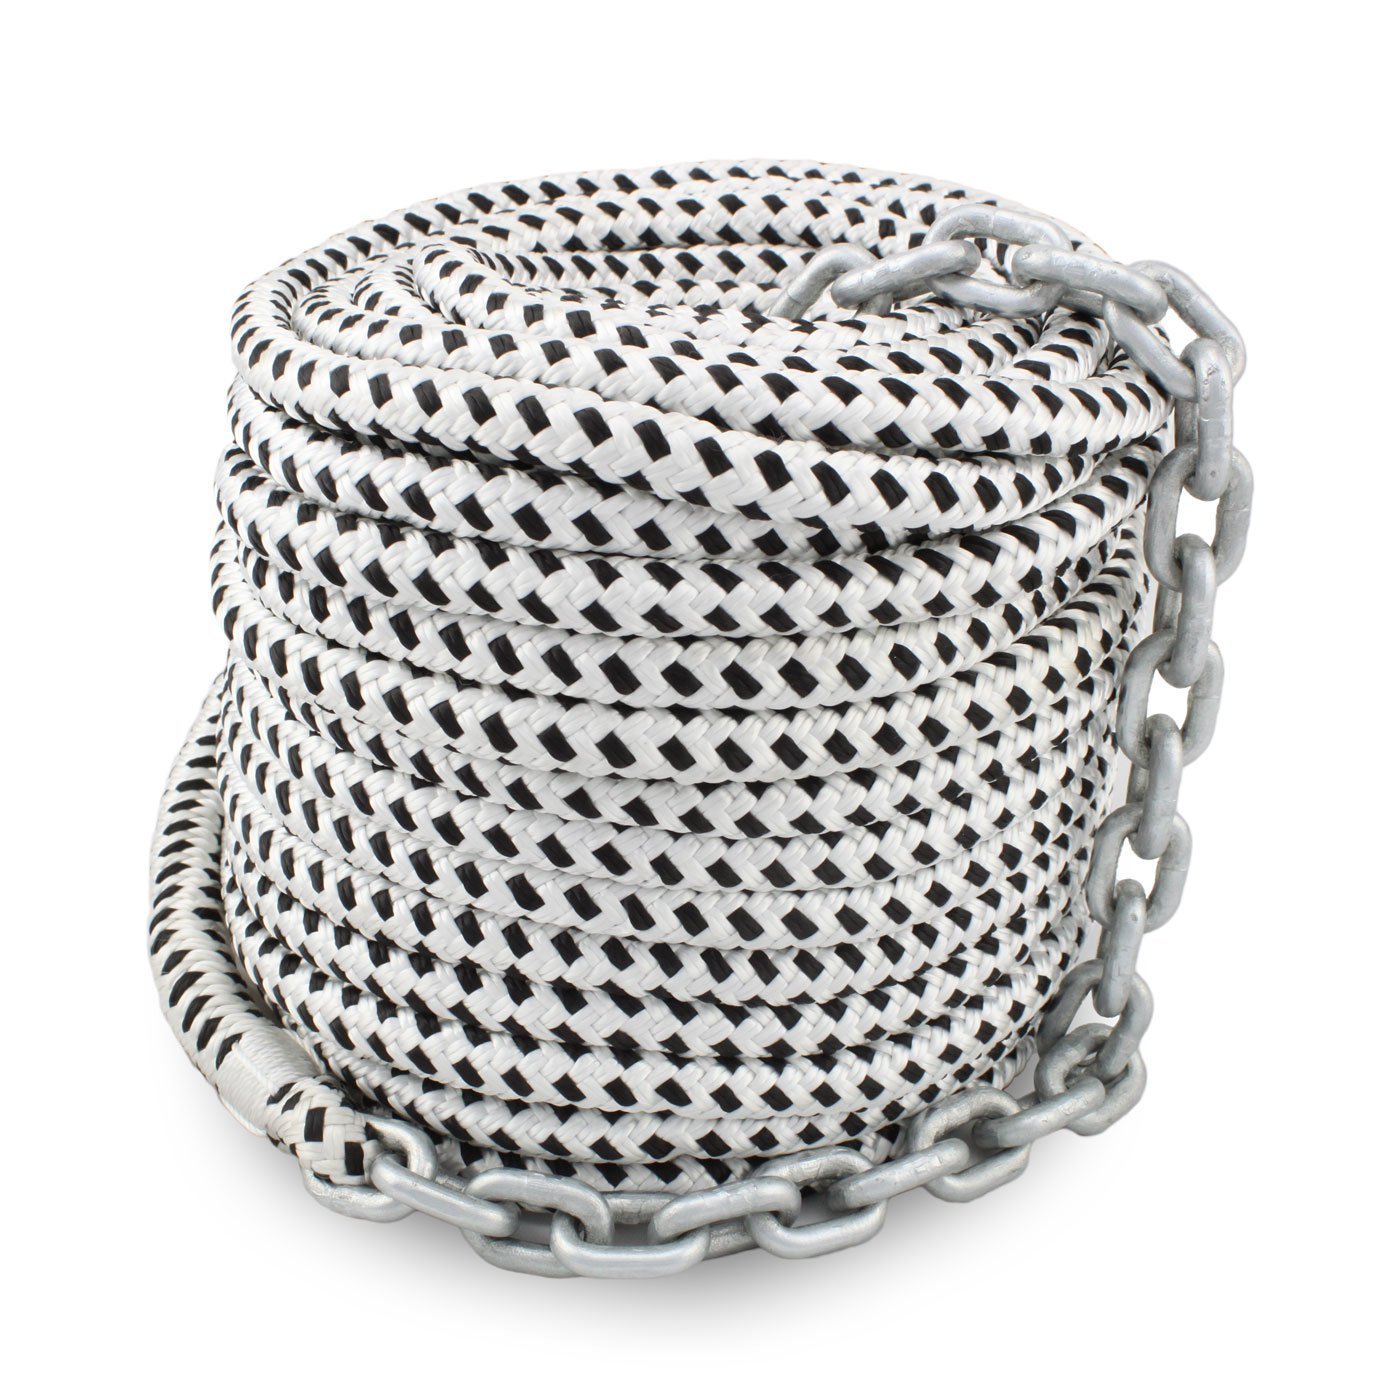 High quality double braided anchor line with chain with 9/16inch* 250feet for yacht marine use